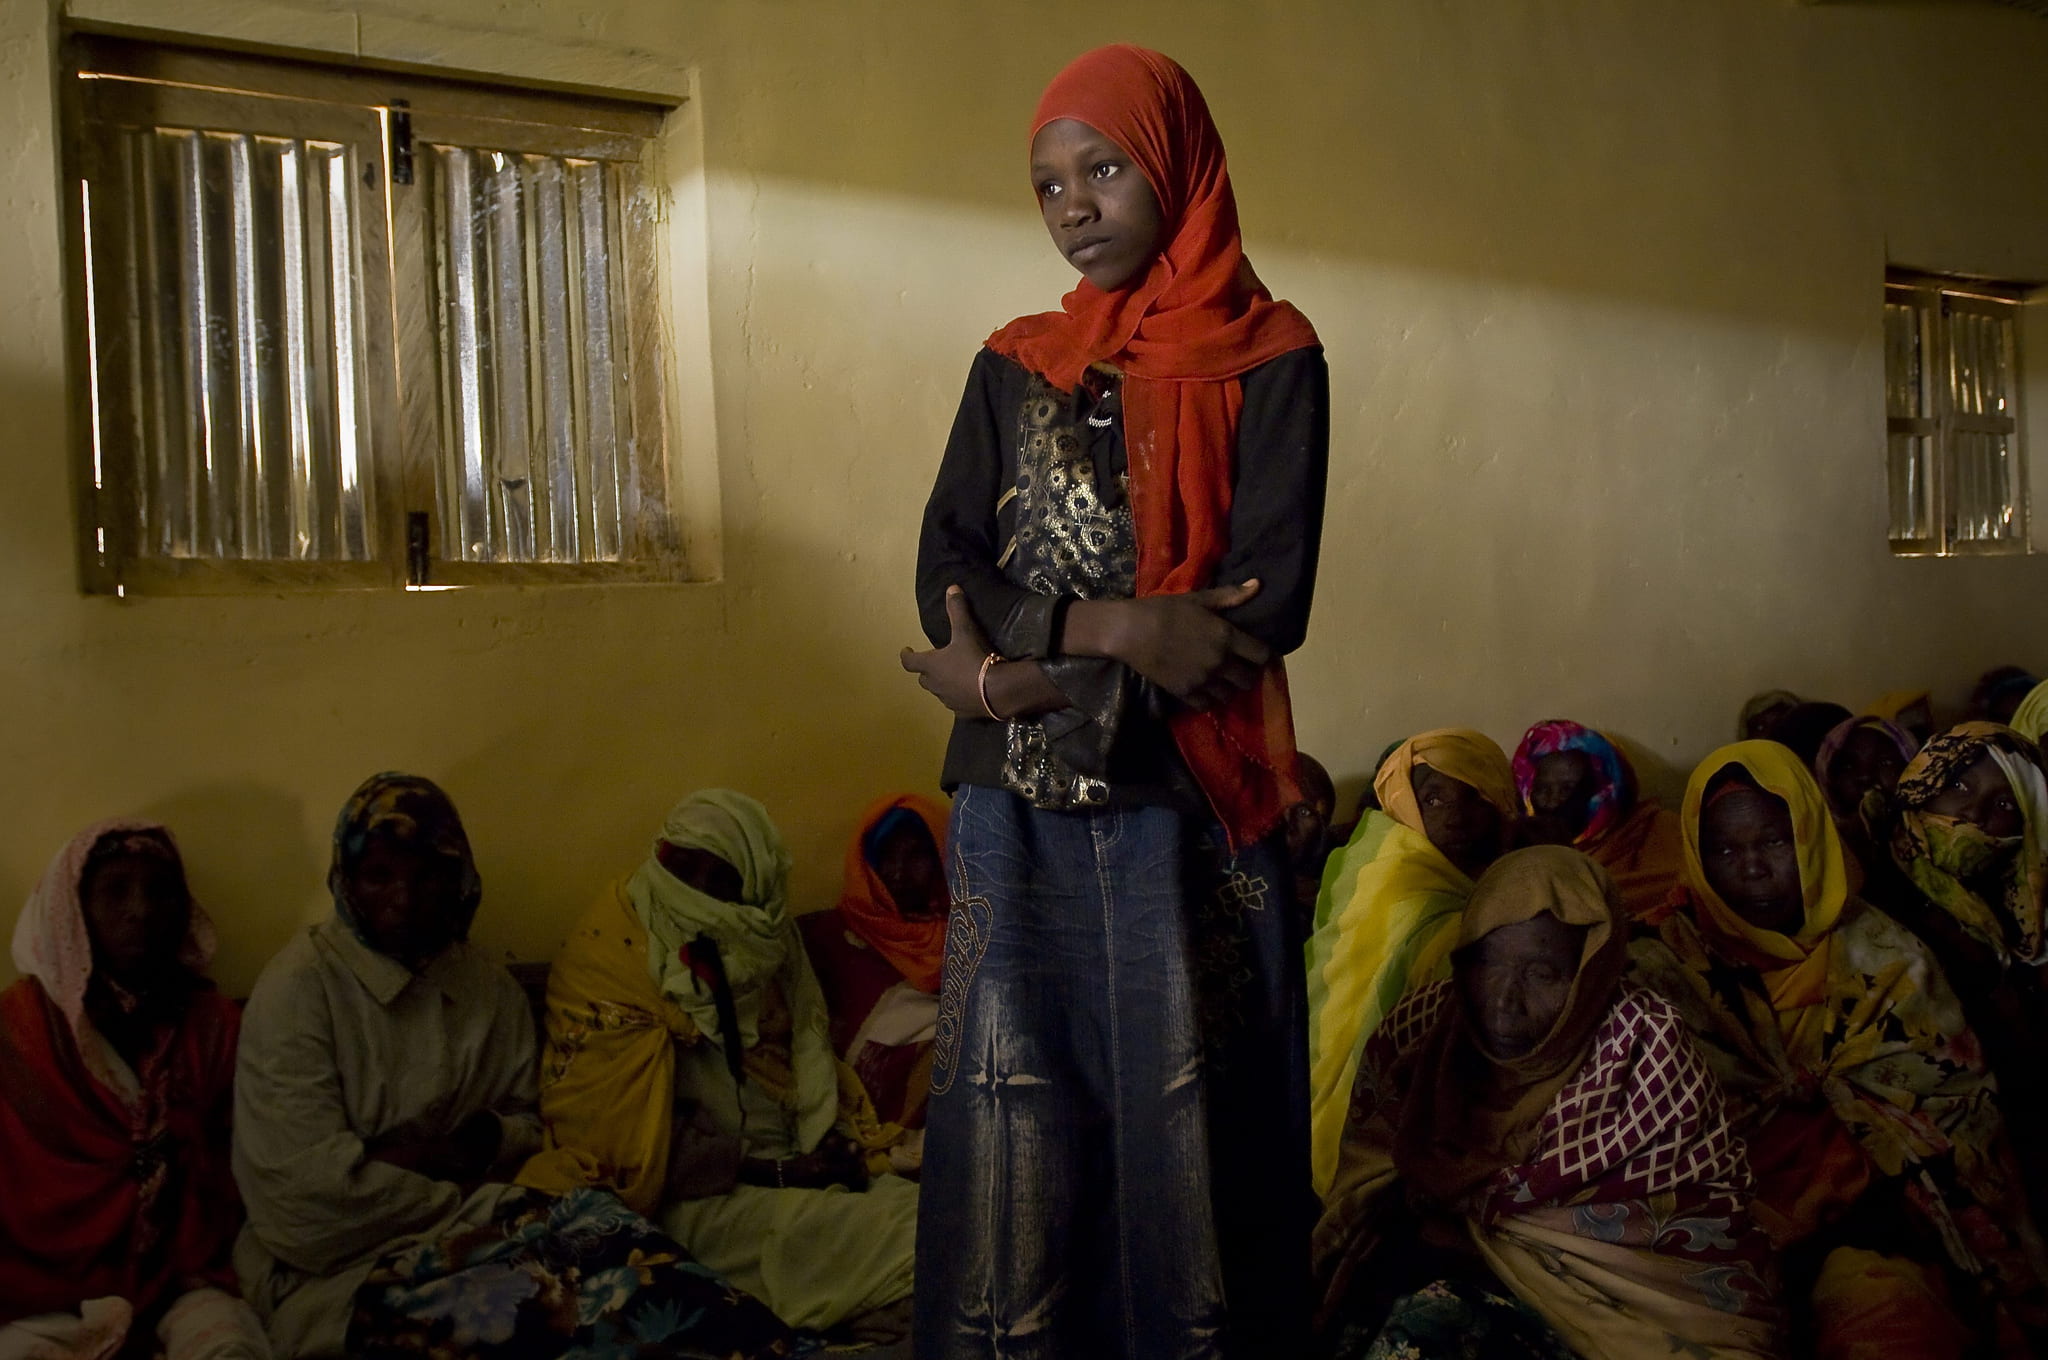 A refugee woman in a bright red hijab stands in a dark room with other women seated on the floor behind her.